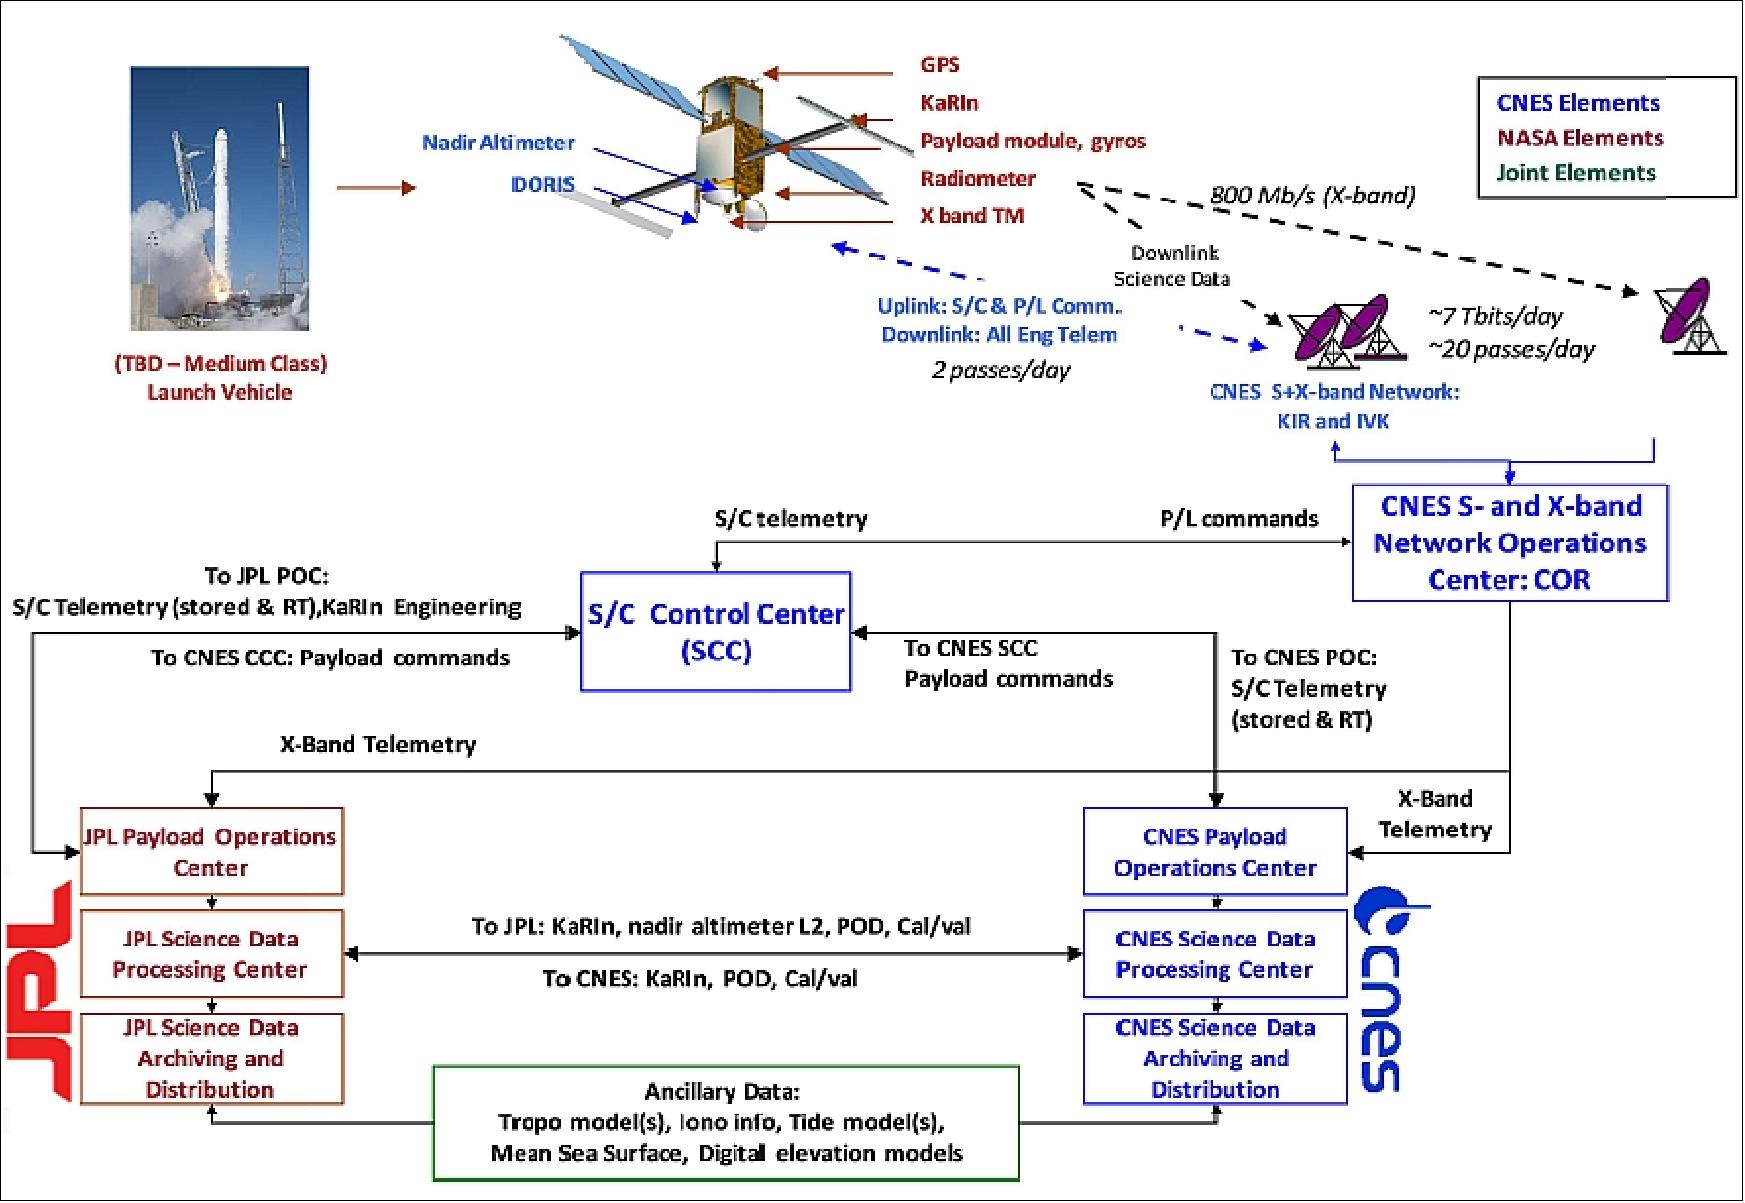 Figure 1: Overview of the mission architecture (image credit: NASA)